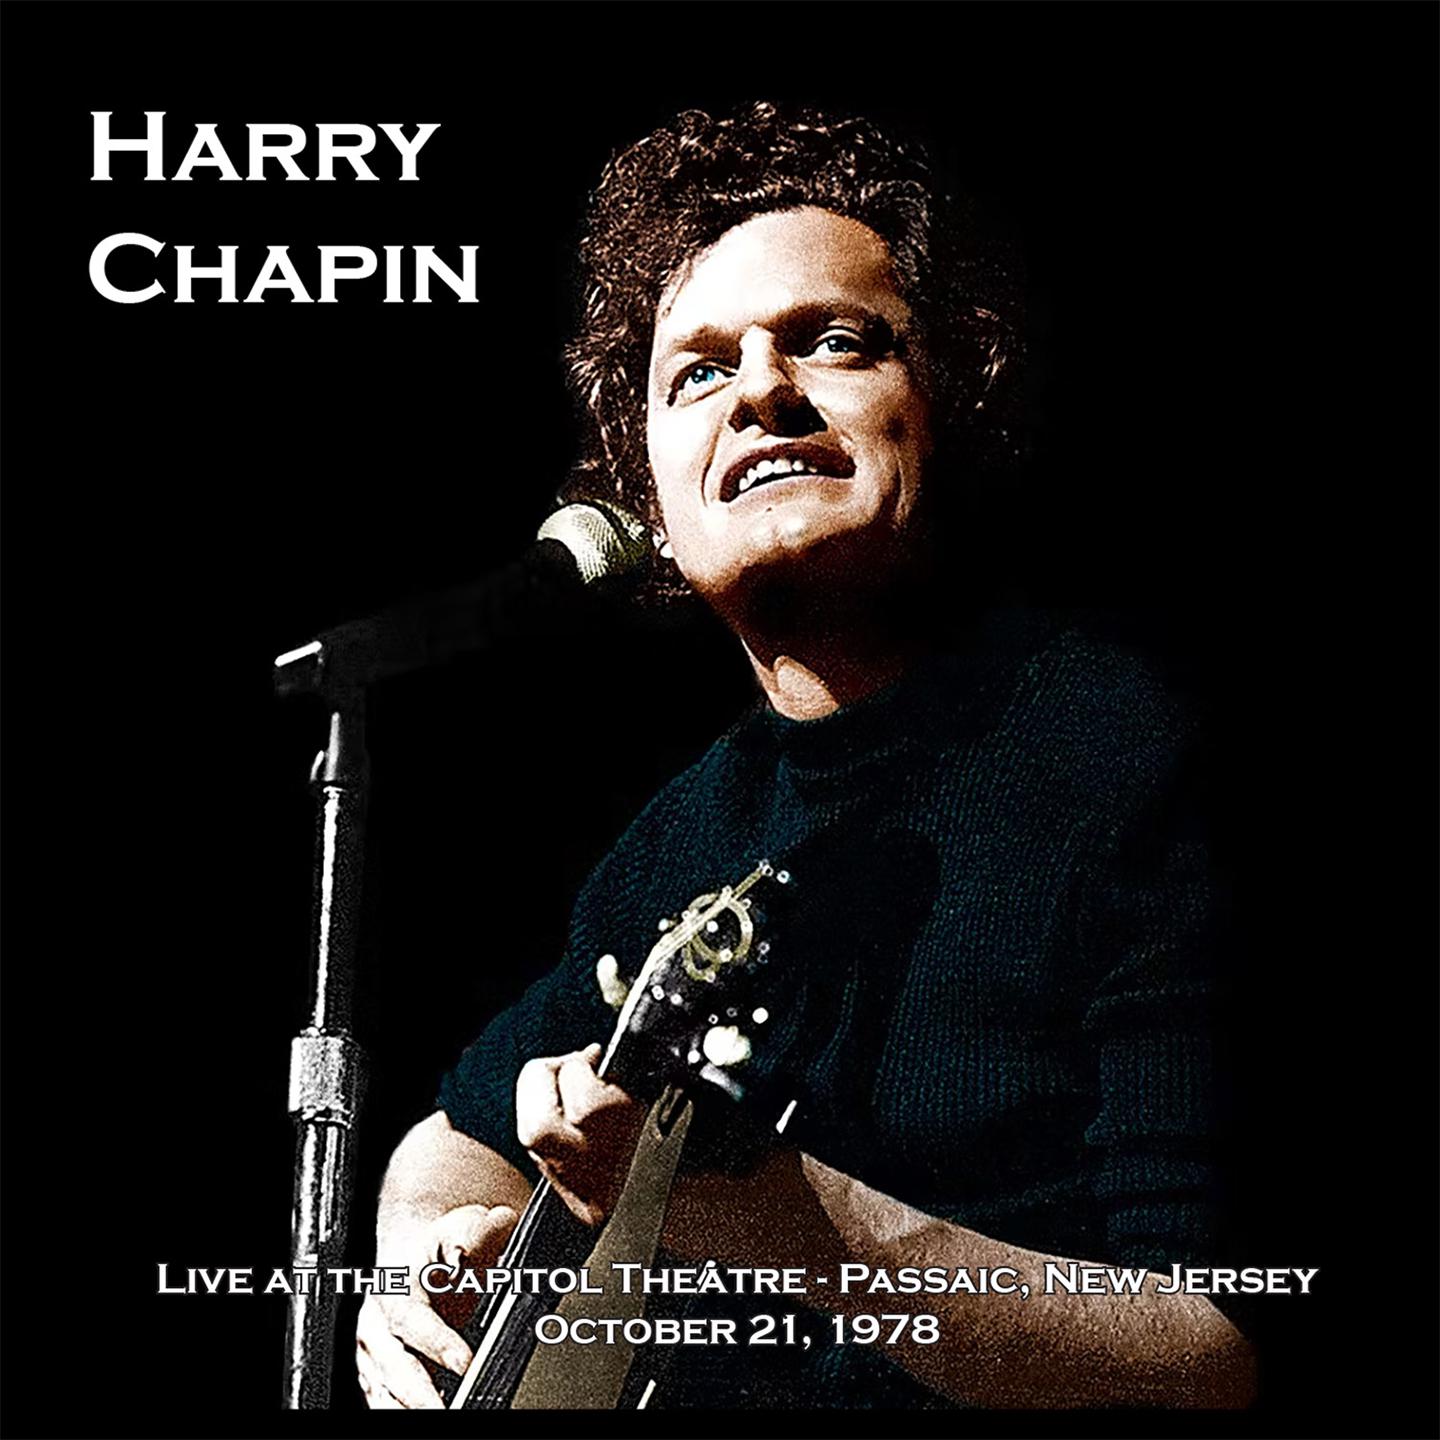 Harry Chapin - 30,000 Pounds Of Bananas (Live)